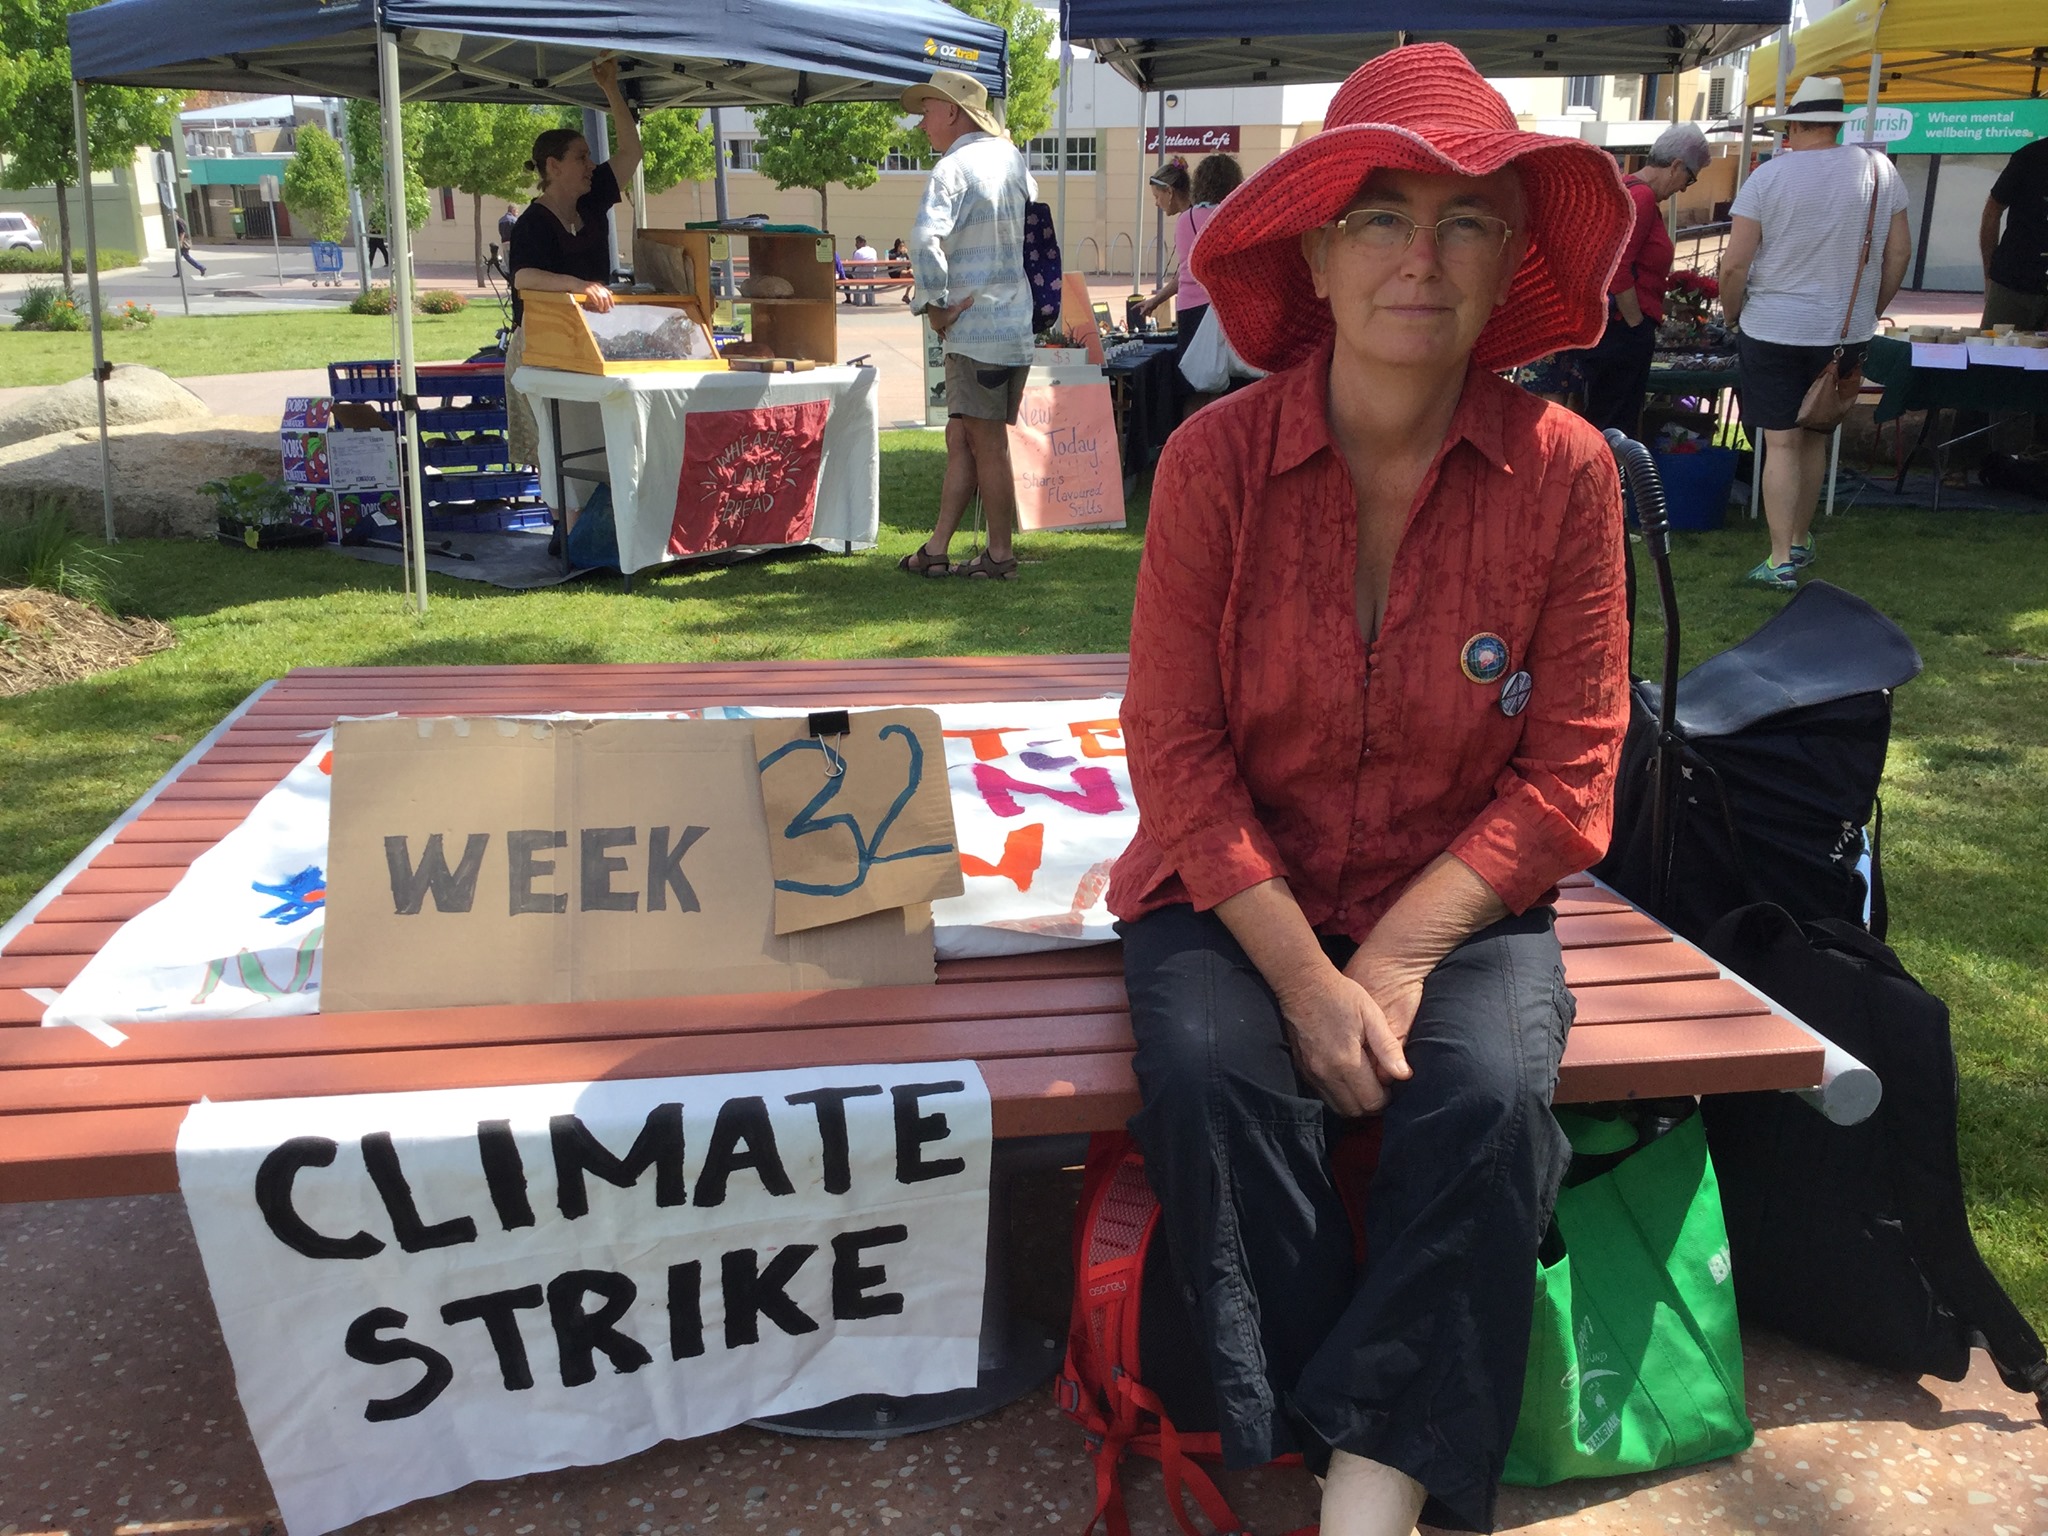 Bega woman celebrates year of weekly climate strikes